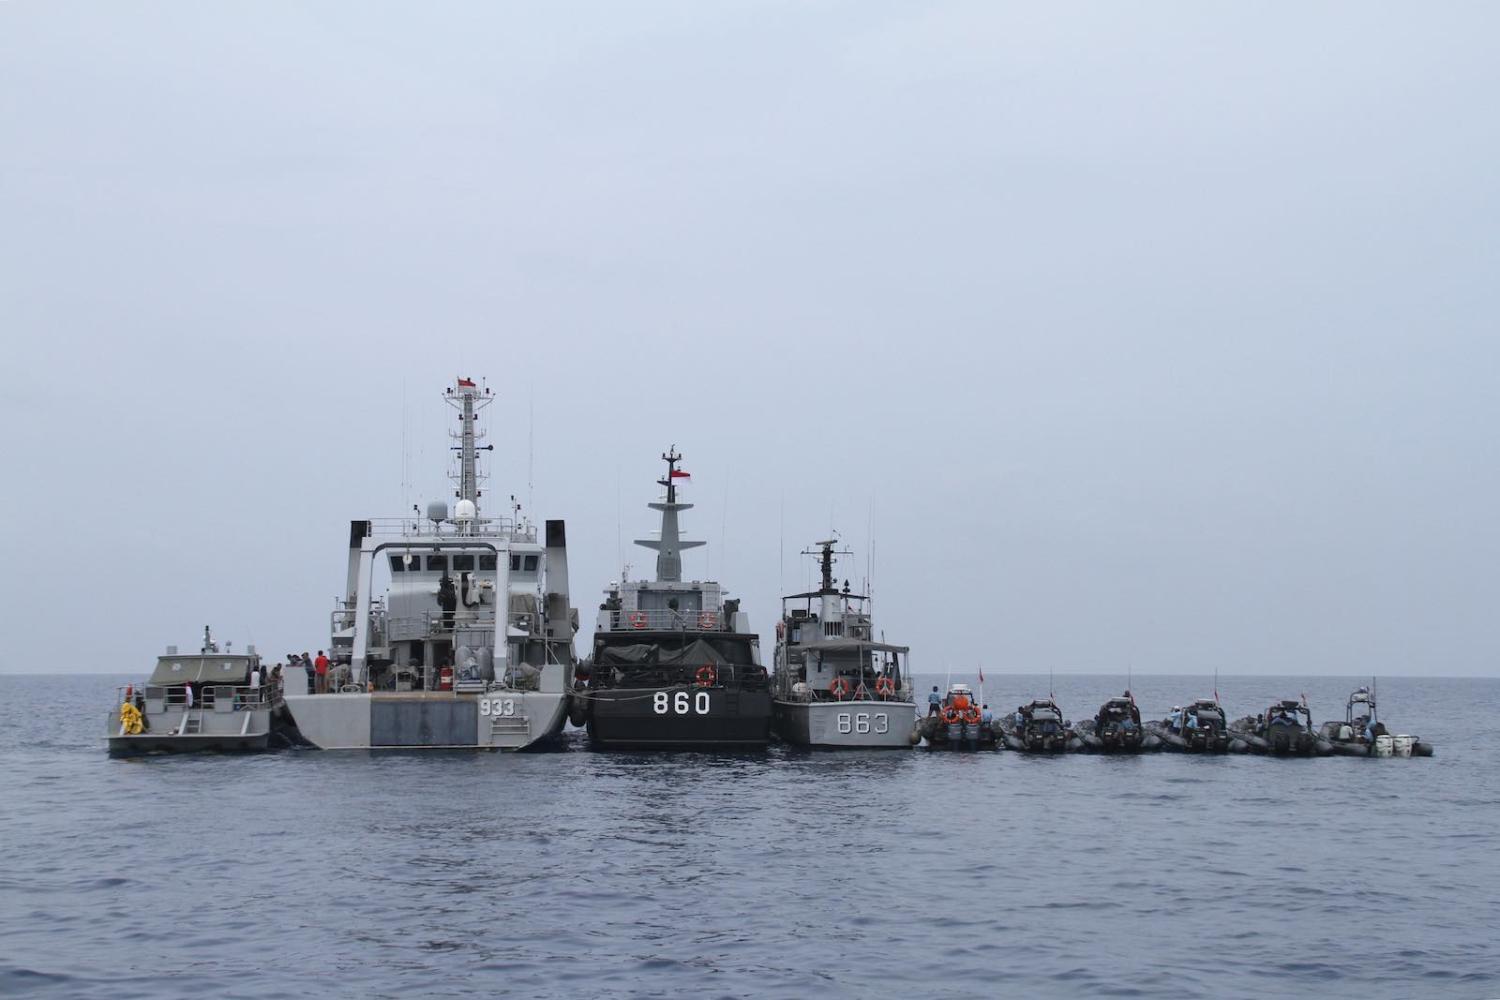 Indonesian navy vessels preparing for a search and rescue operation in 2018 (Azwar Ipank/AFP via Getty Images)